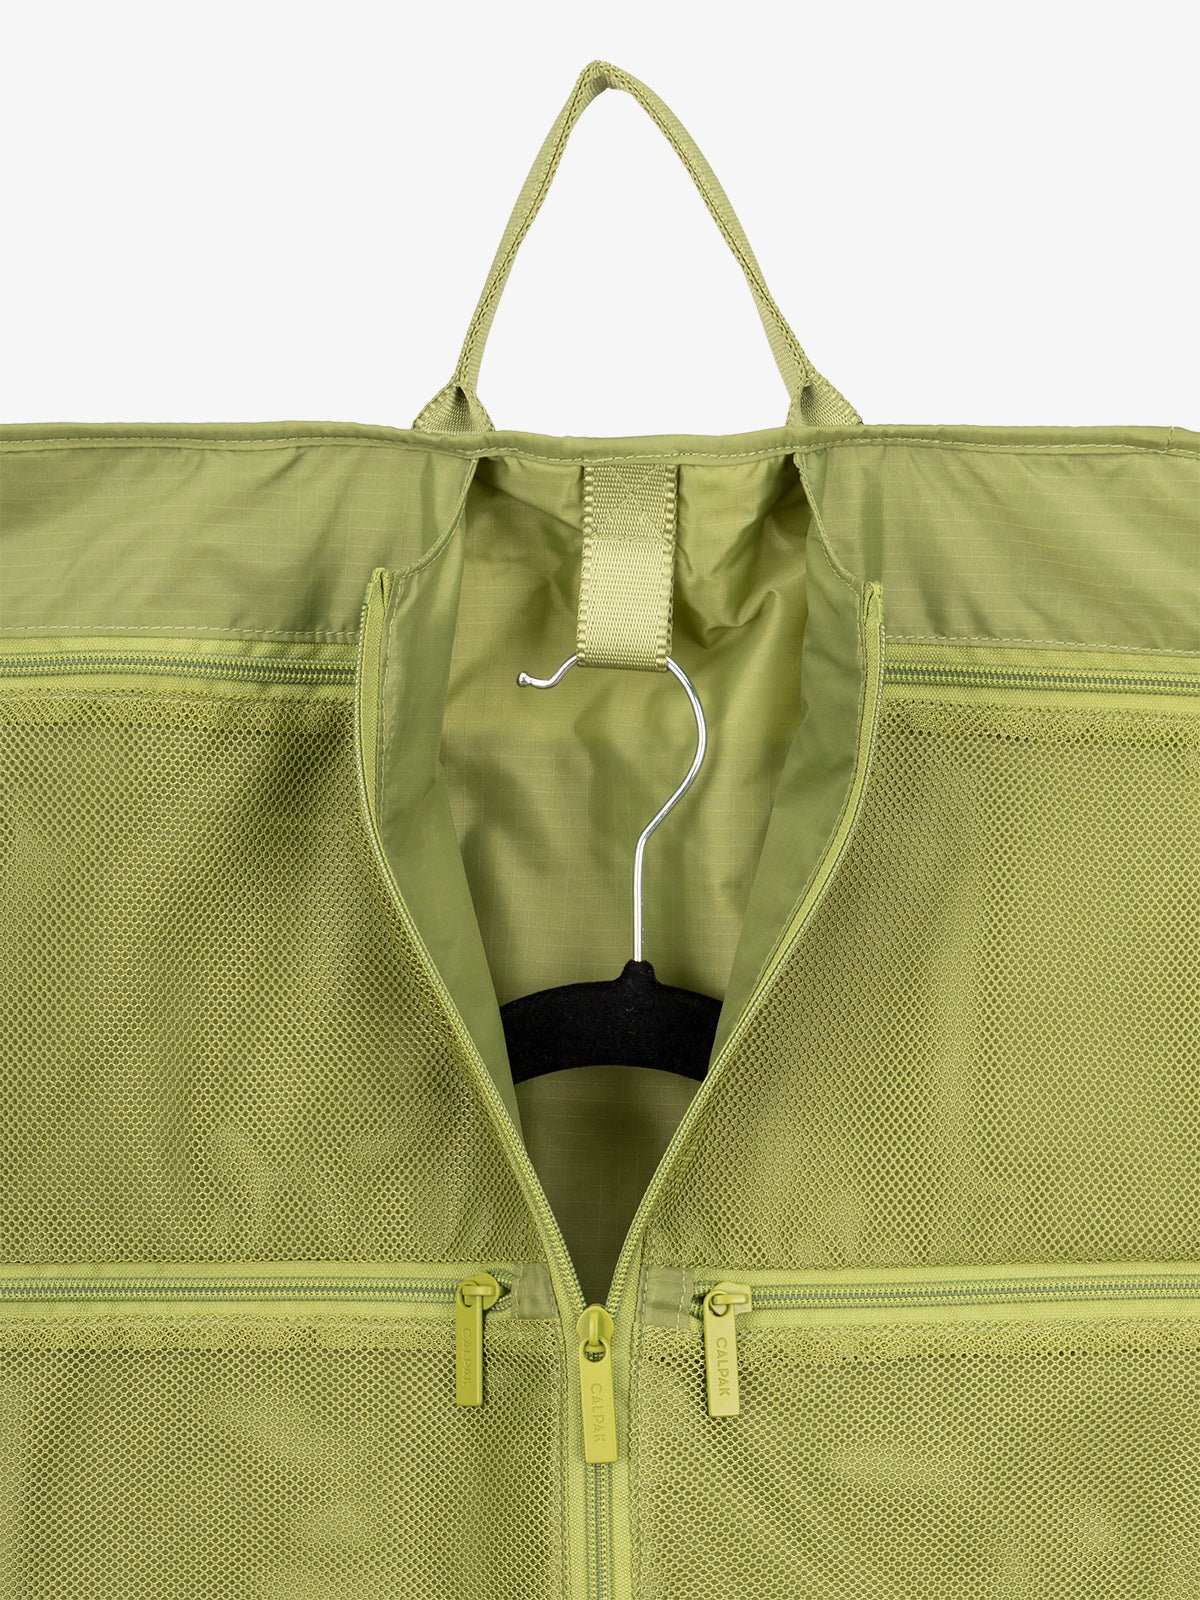 CALPAK Compakt large hanging garment travel bag with handle and mesh pockets in palm green